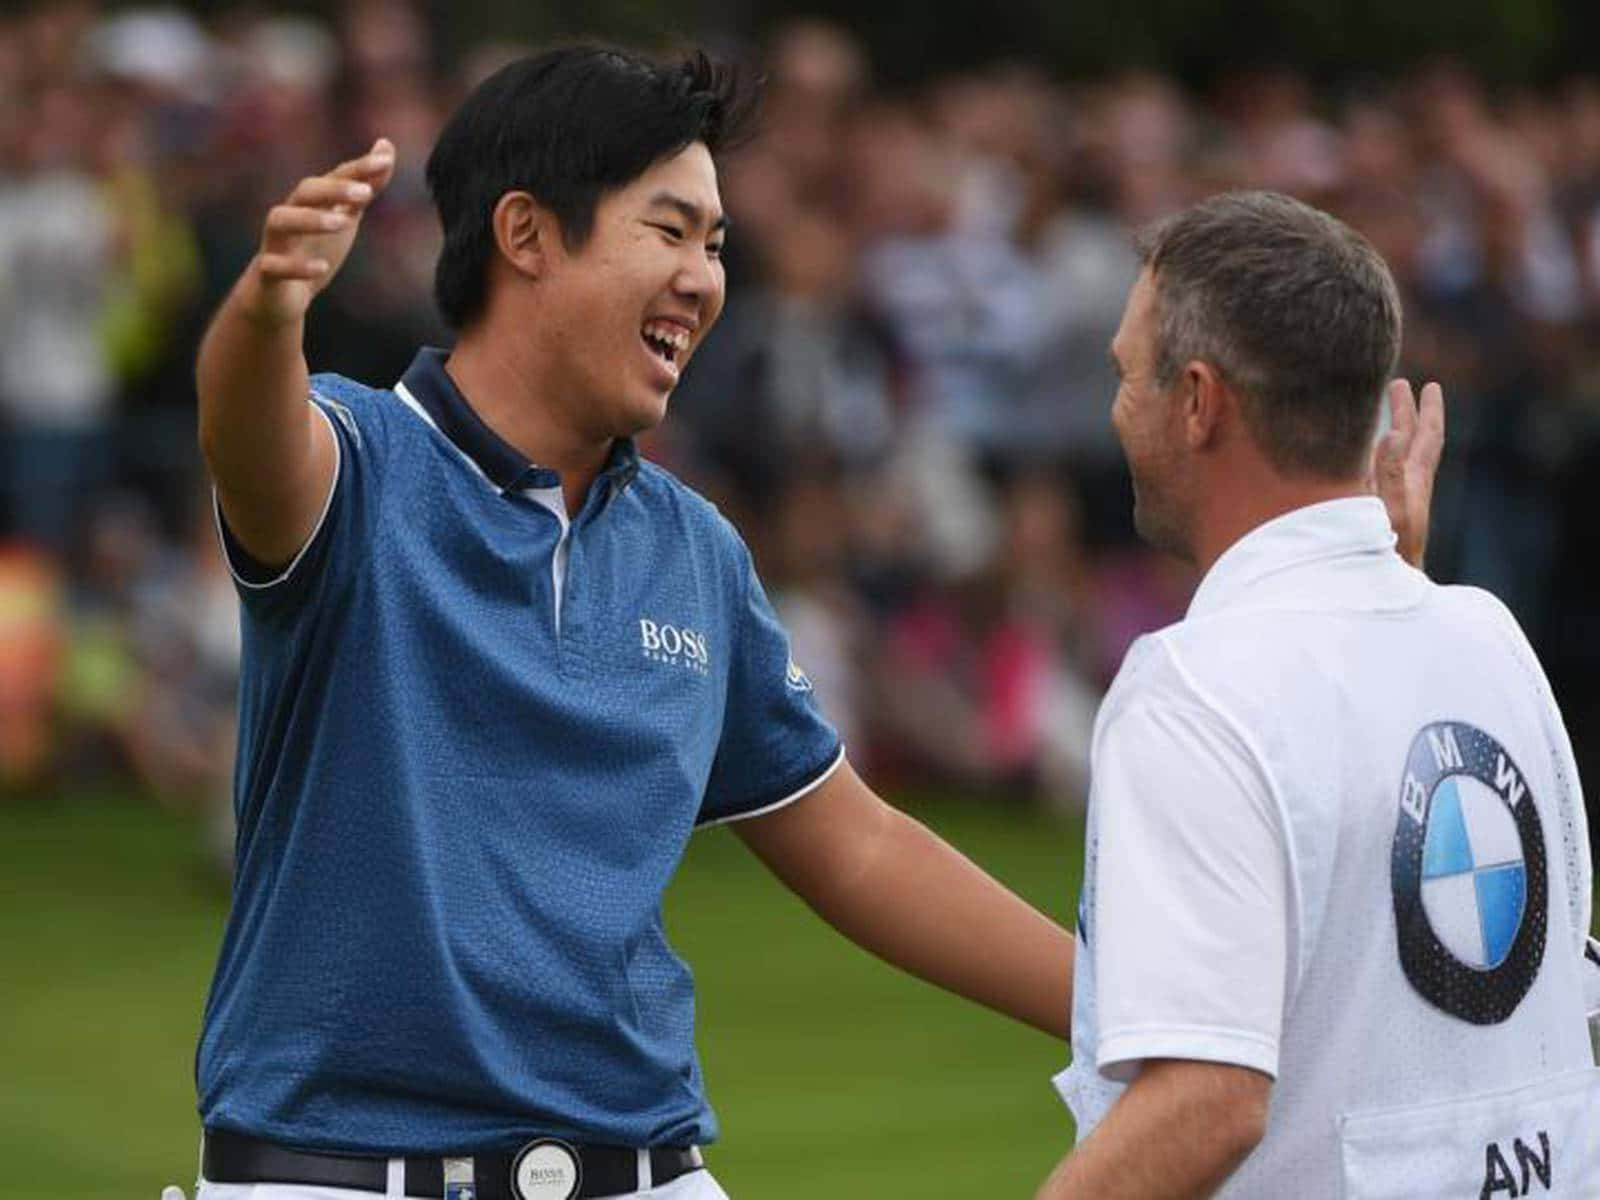 Byeong Hun An And His Caddie Celebrating Victory Background